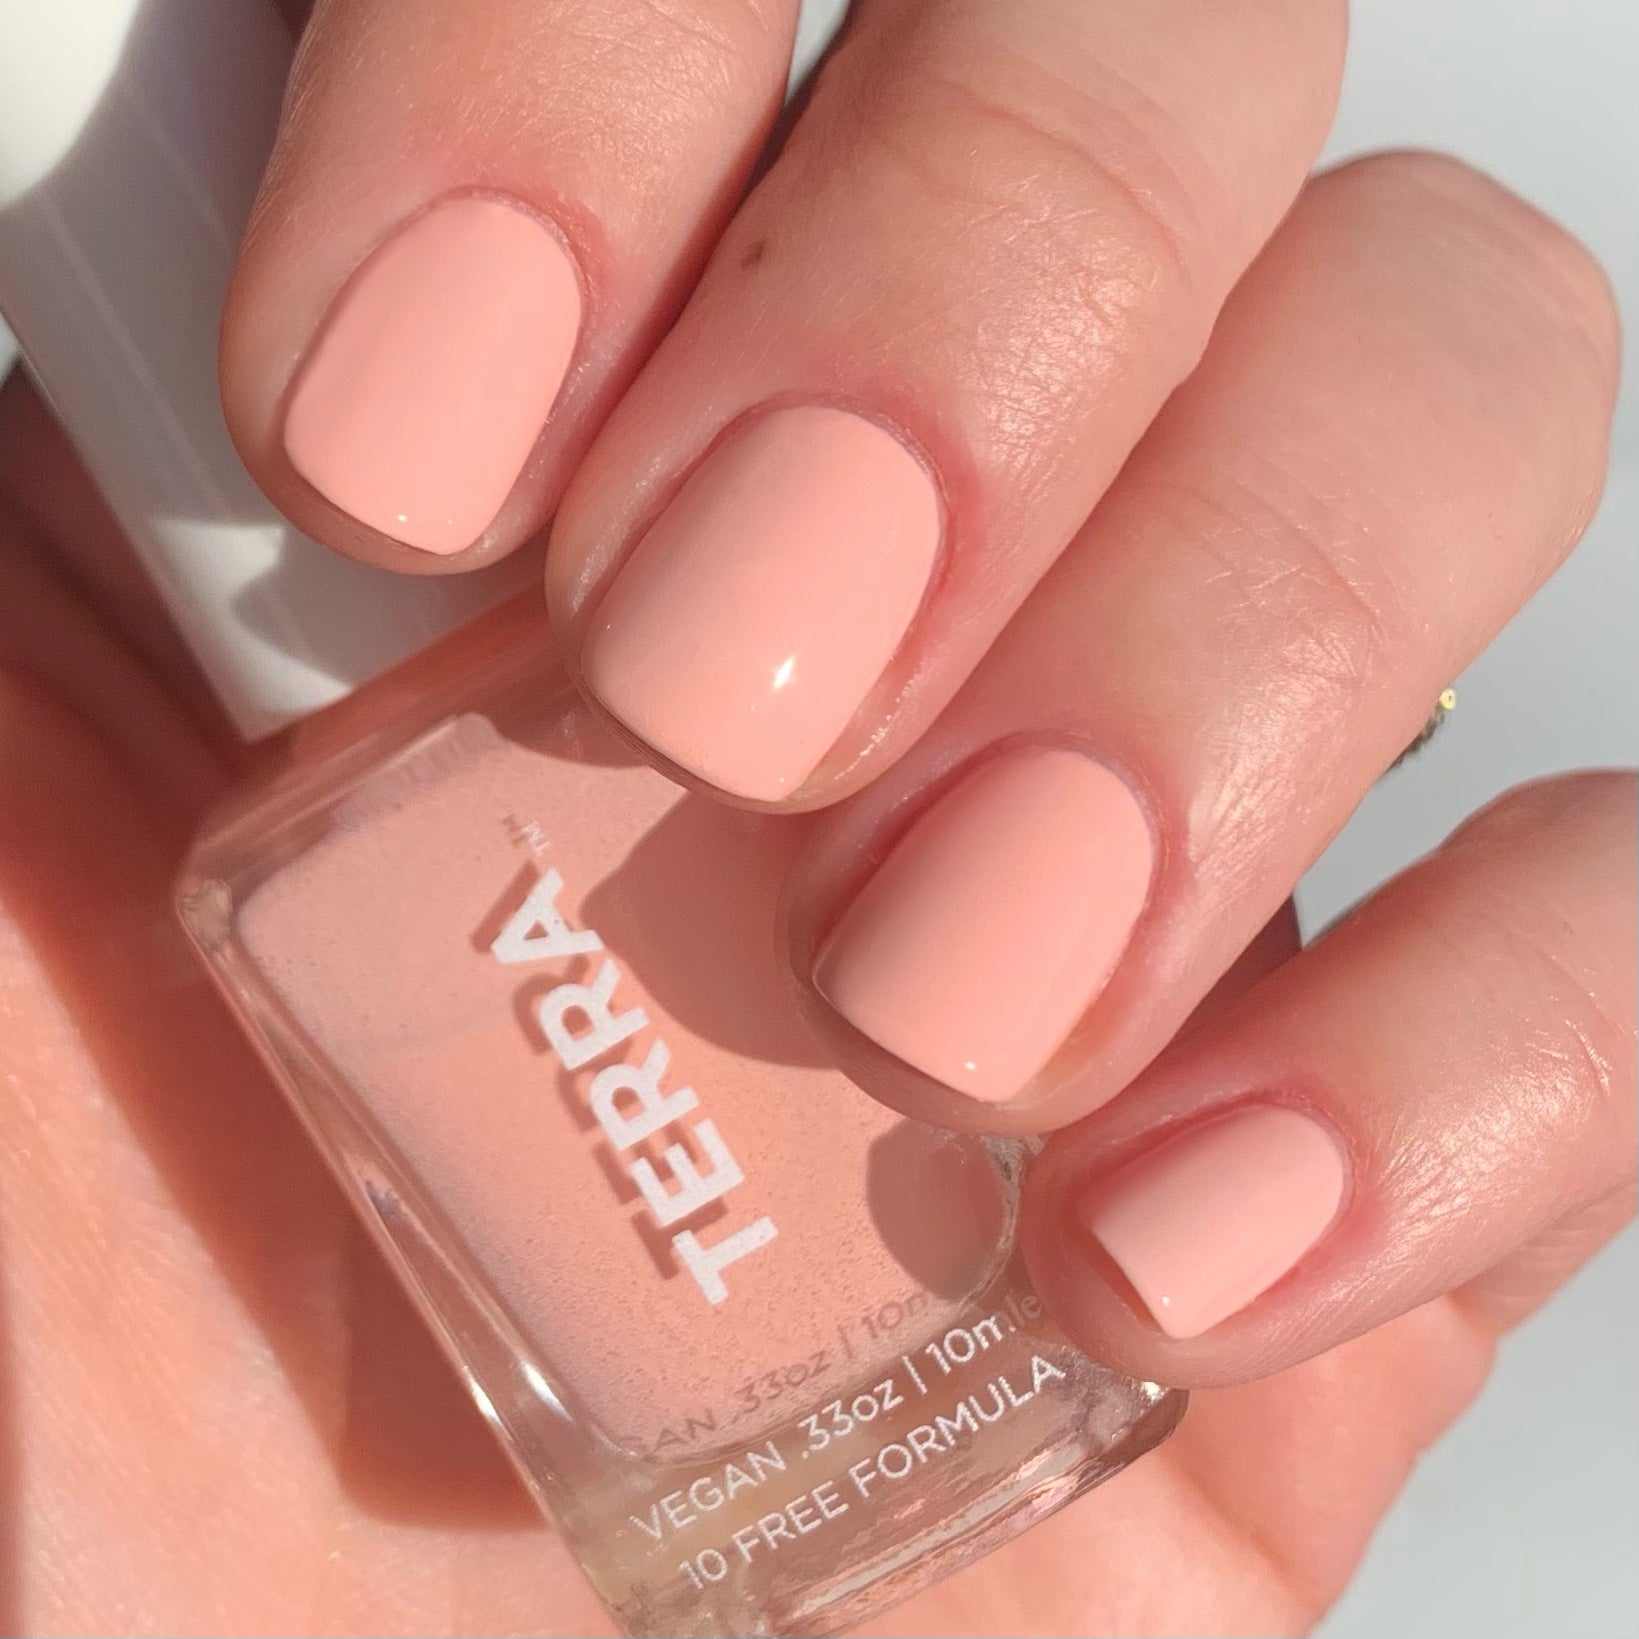 OPI-Hopelessly in love- , a light peach pink color | Peach colored nails, Peach  nails, Color change nail polish